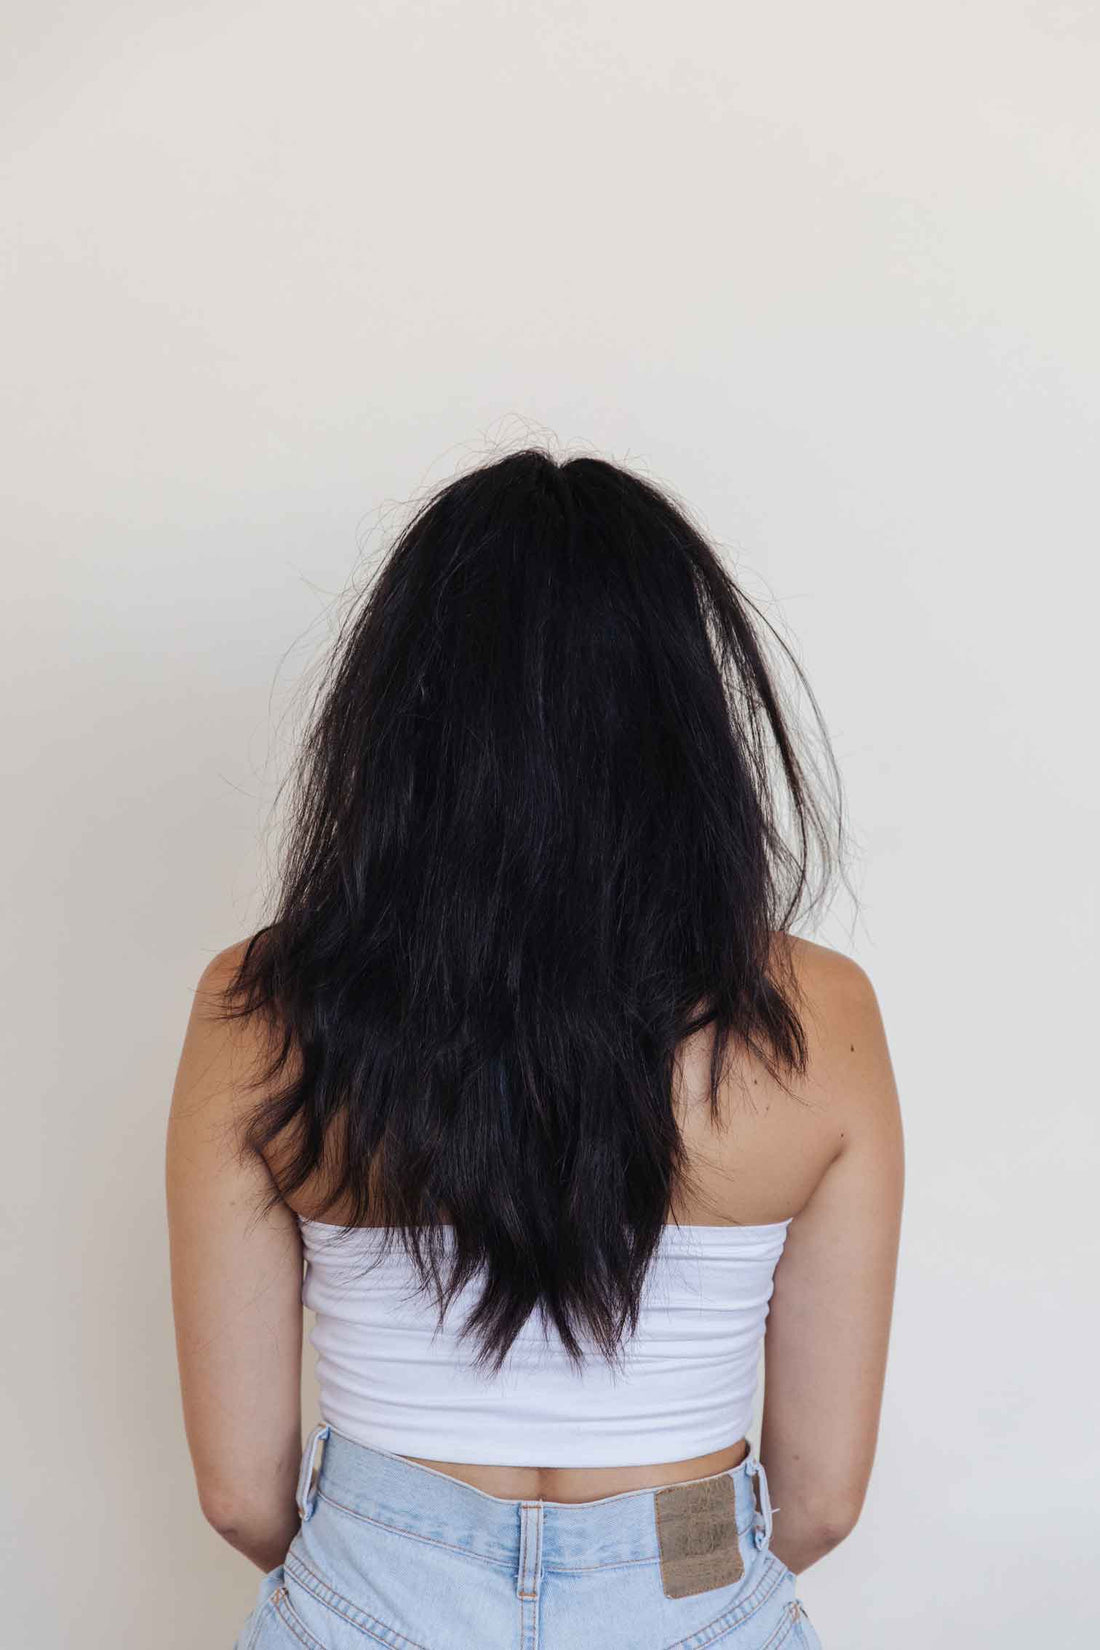 how to fix damaged hair, according to an expert stylist